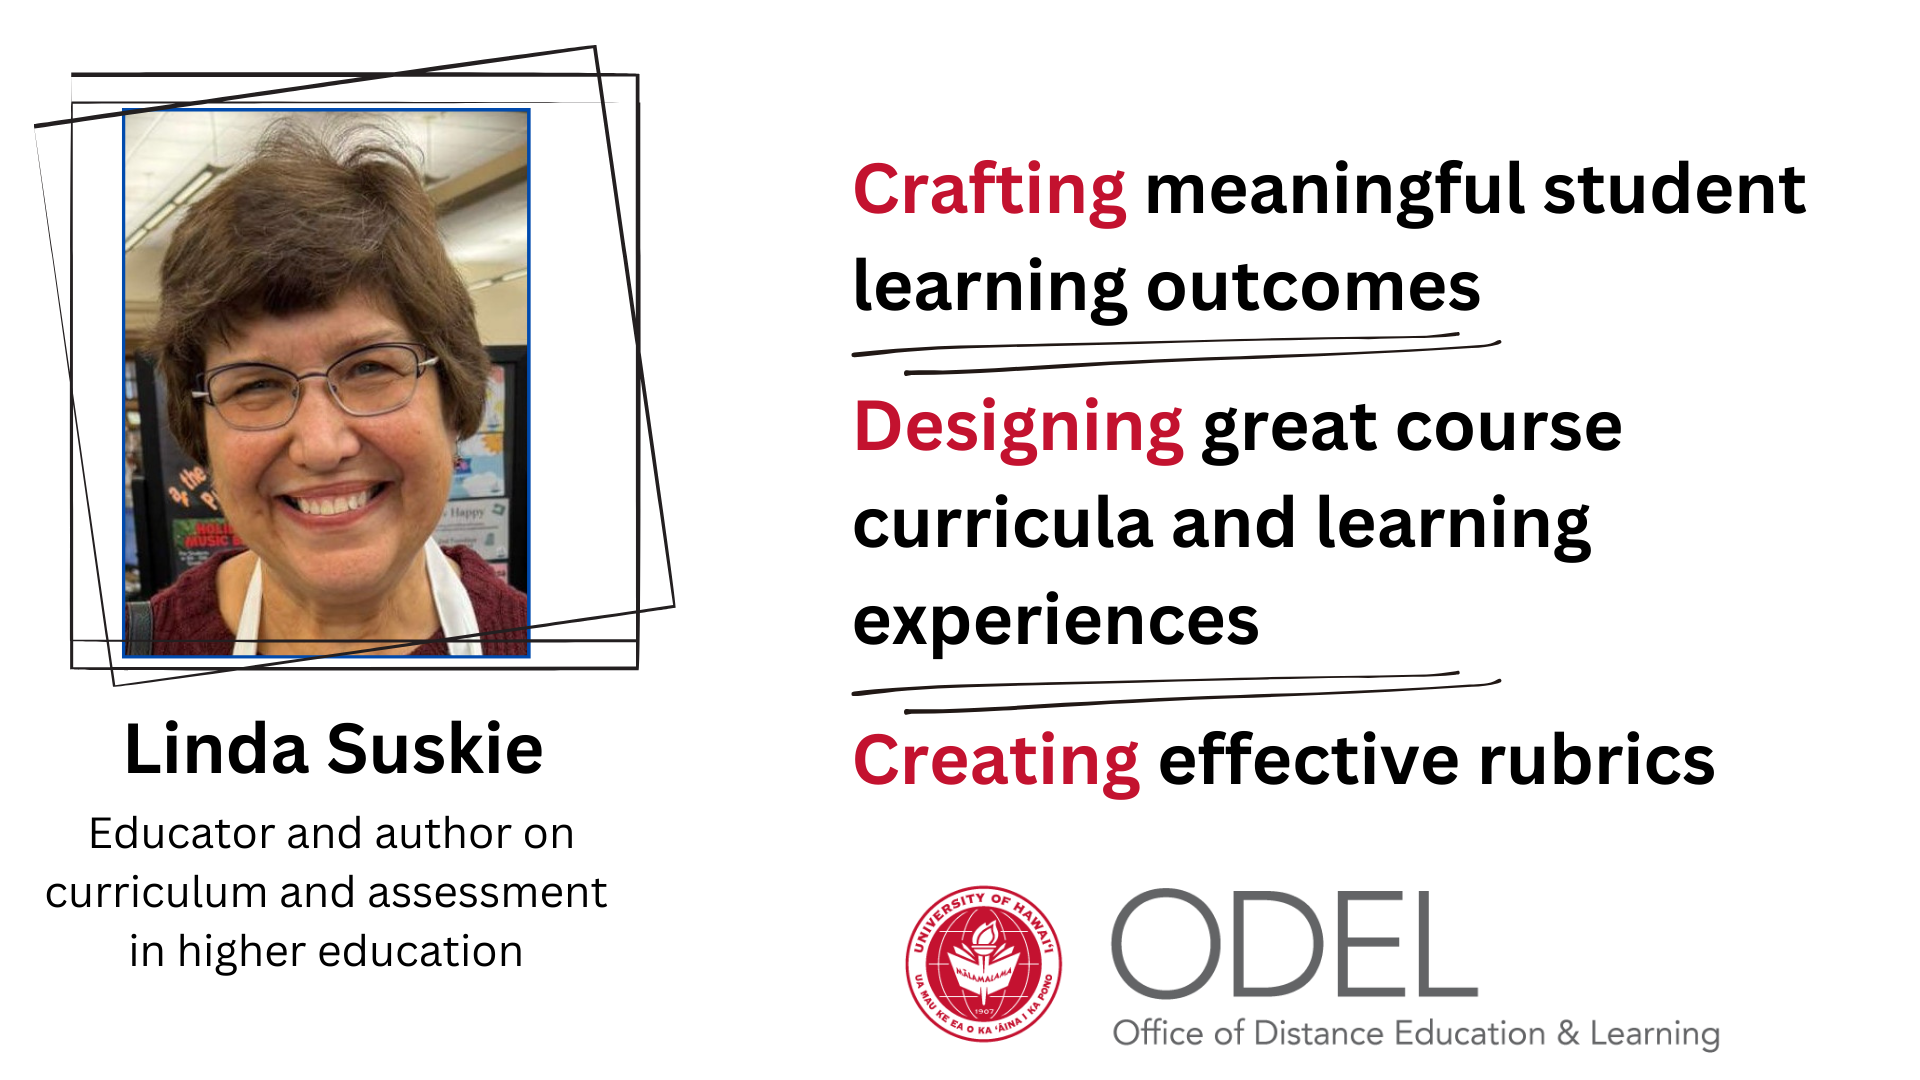 Linda Suskie, educator and author on curriculum and assessment in higher education. Crafting meaningful student learning outcomes. Designing great course curricula and learning experiences. Creating effective rubrics.